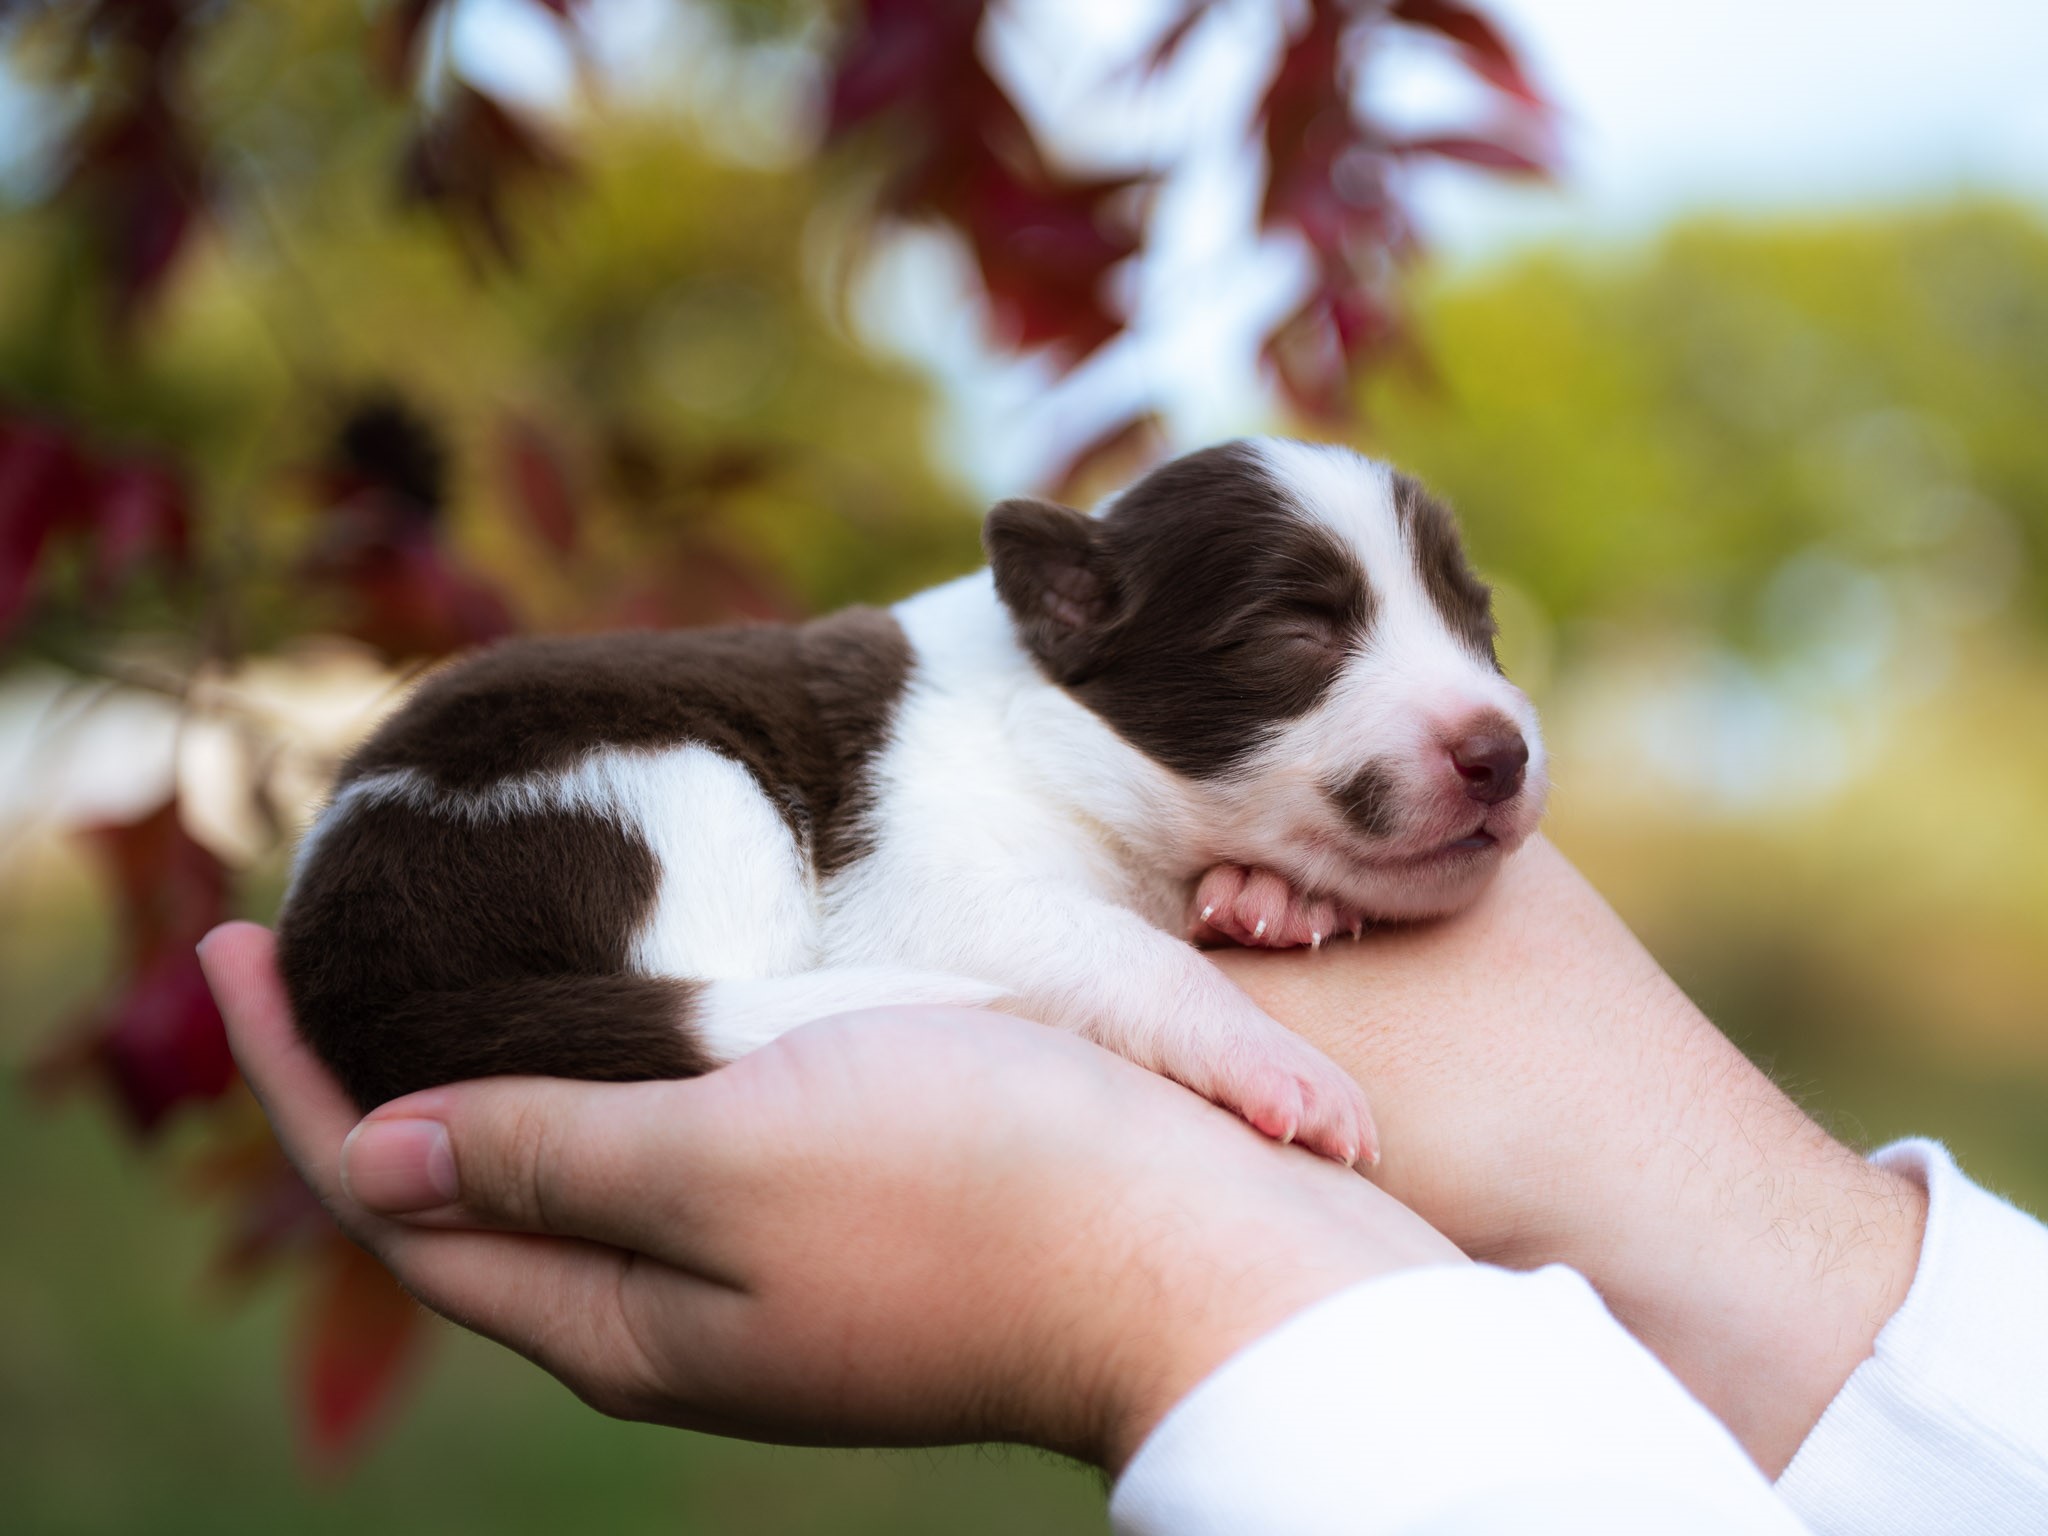 Red & White female Border Collie puppy for sale in Florida.